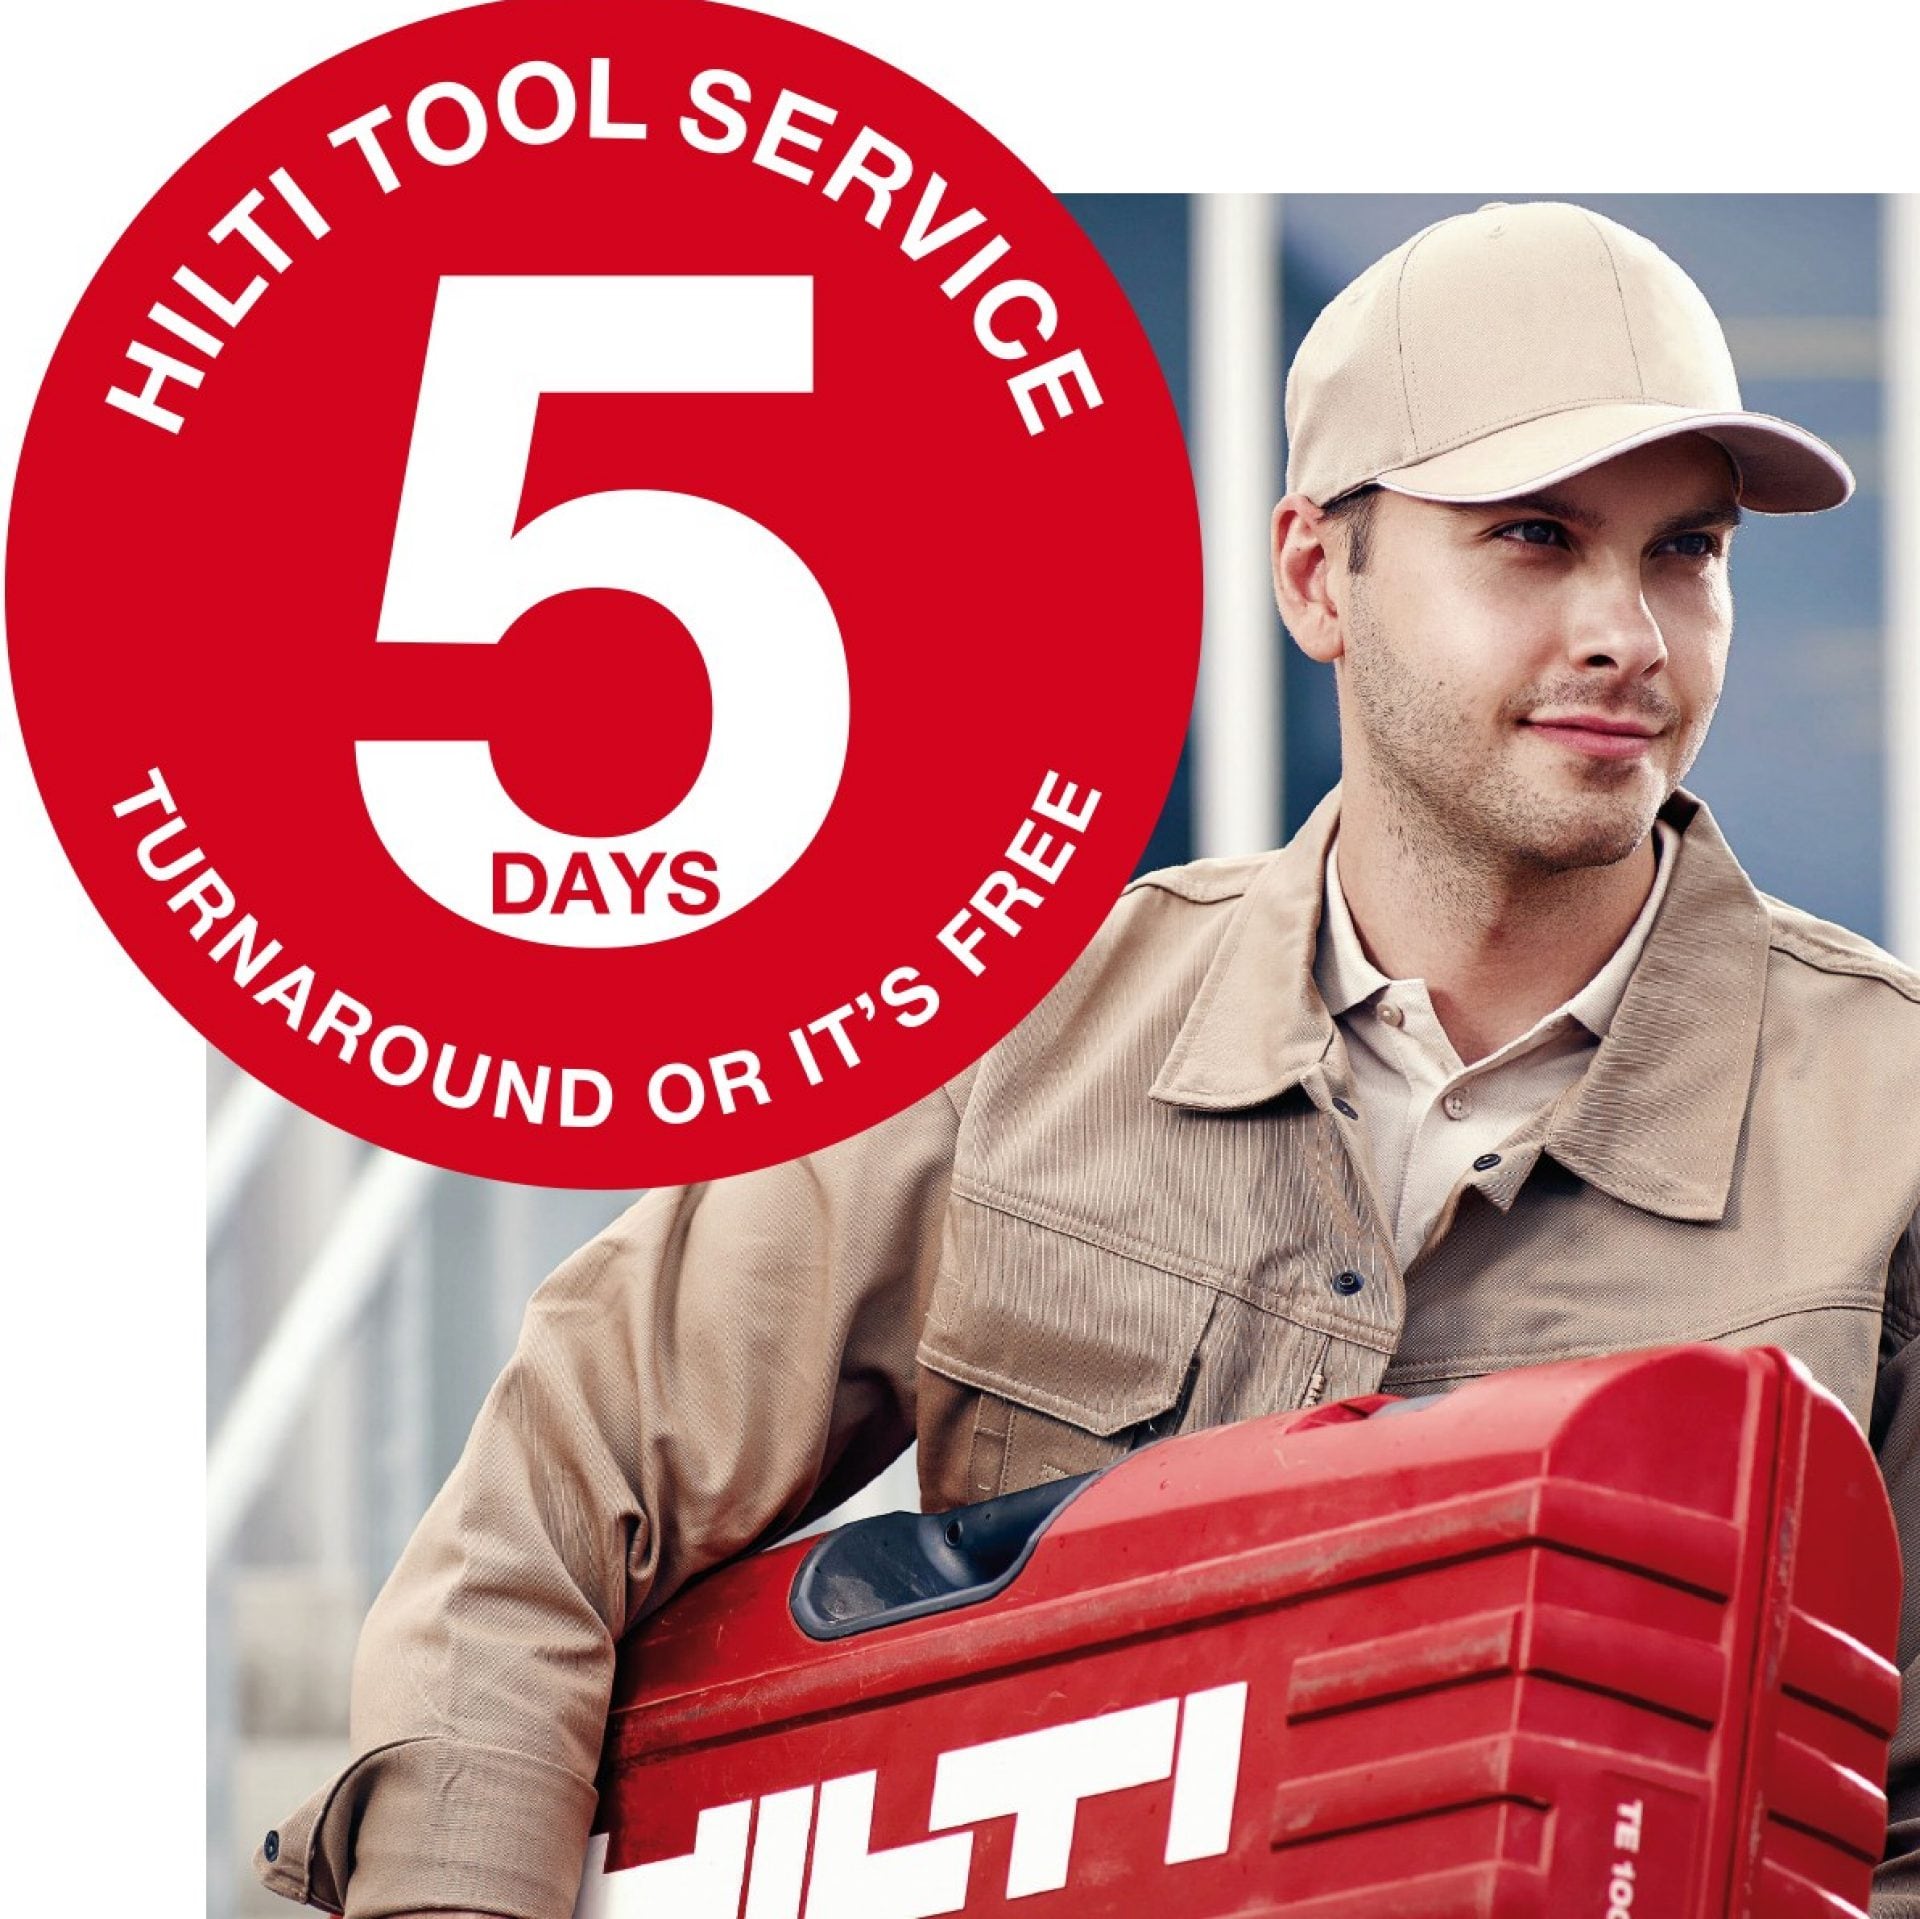 5 days or it's free - Hilti tool service